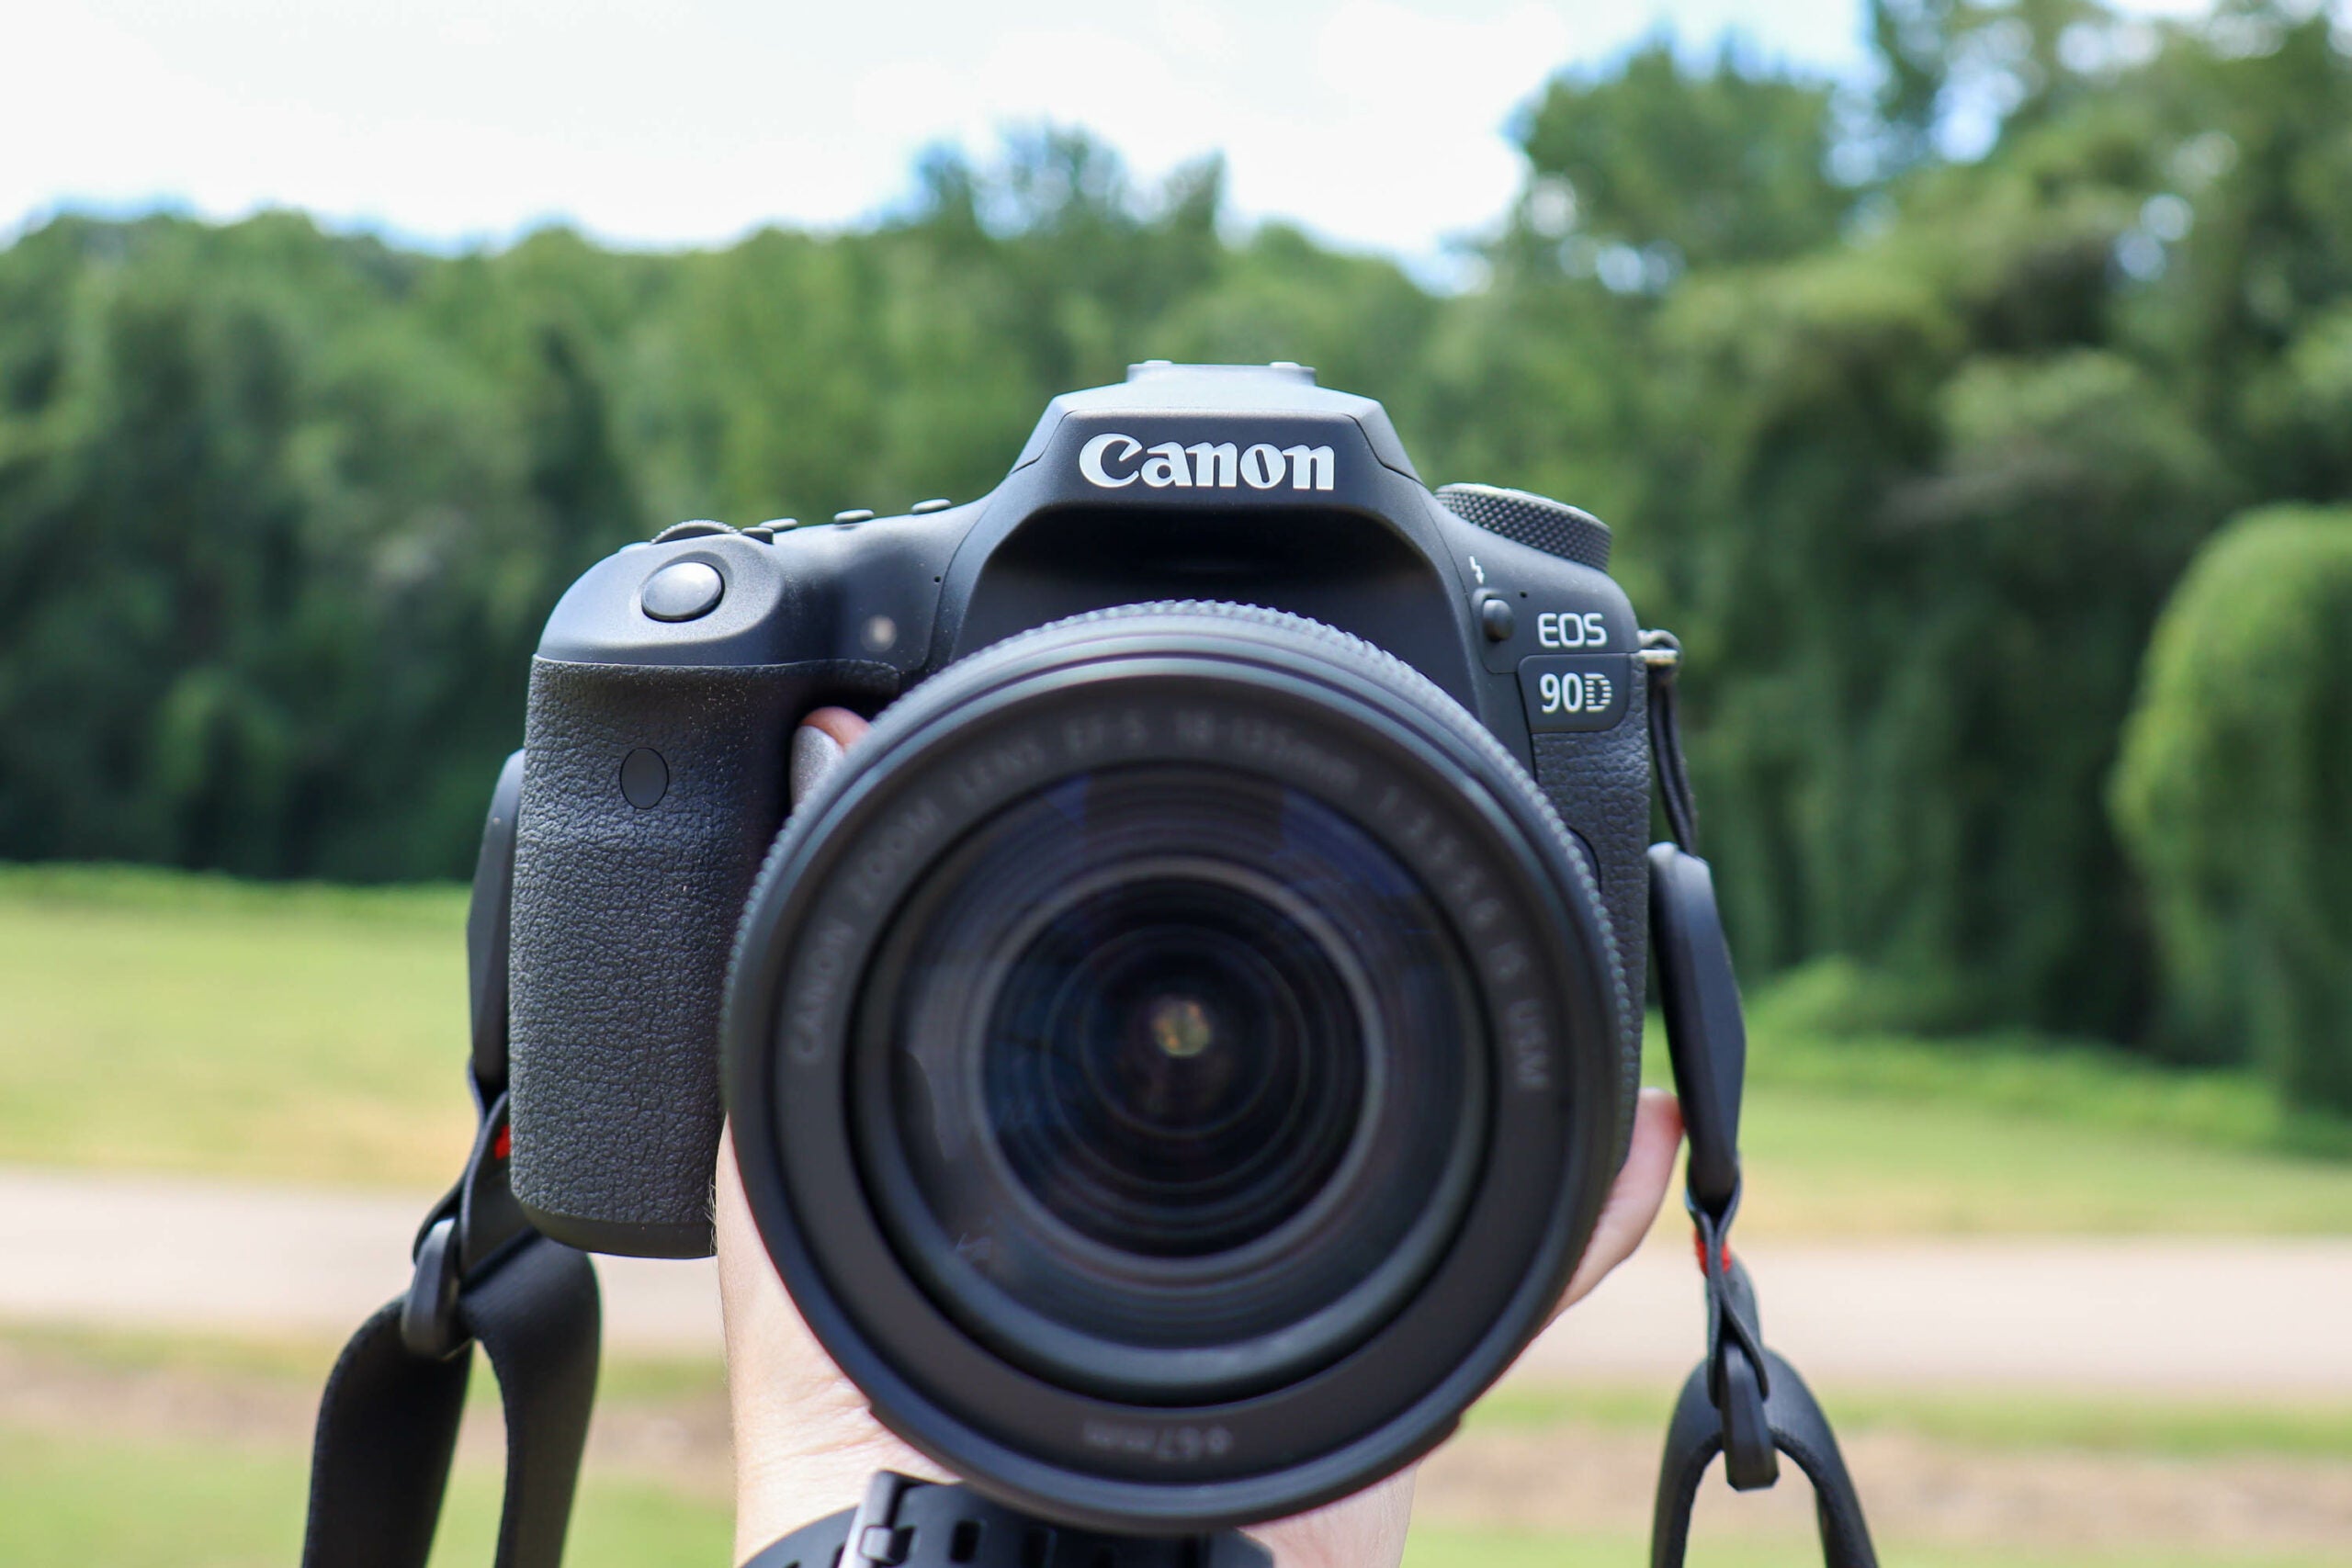 Hands on with the 32.5-megapixel Canon EOS 90D DSLR | Popular Science